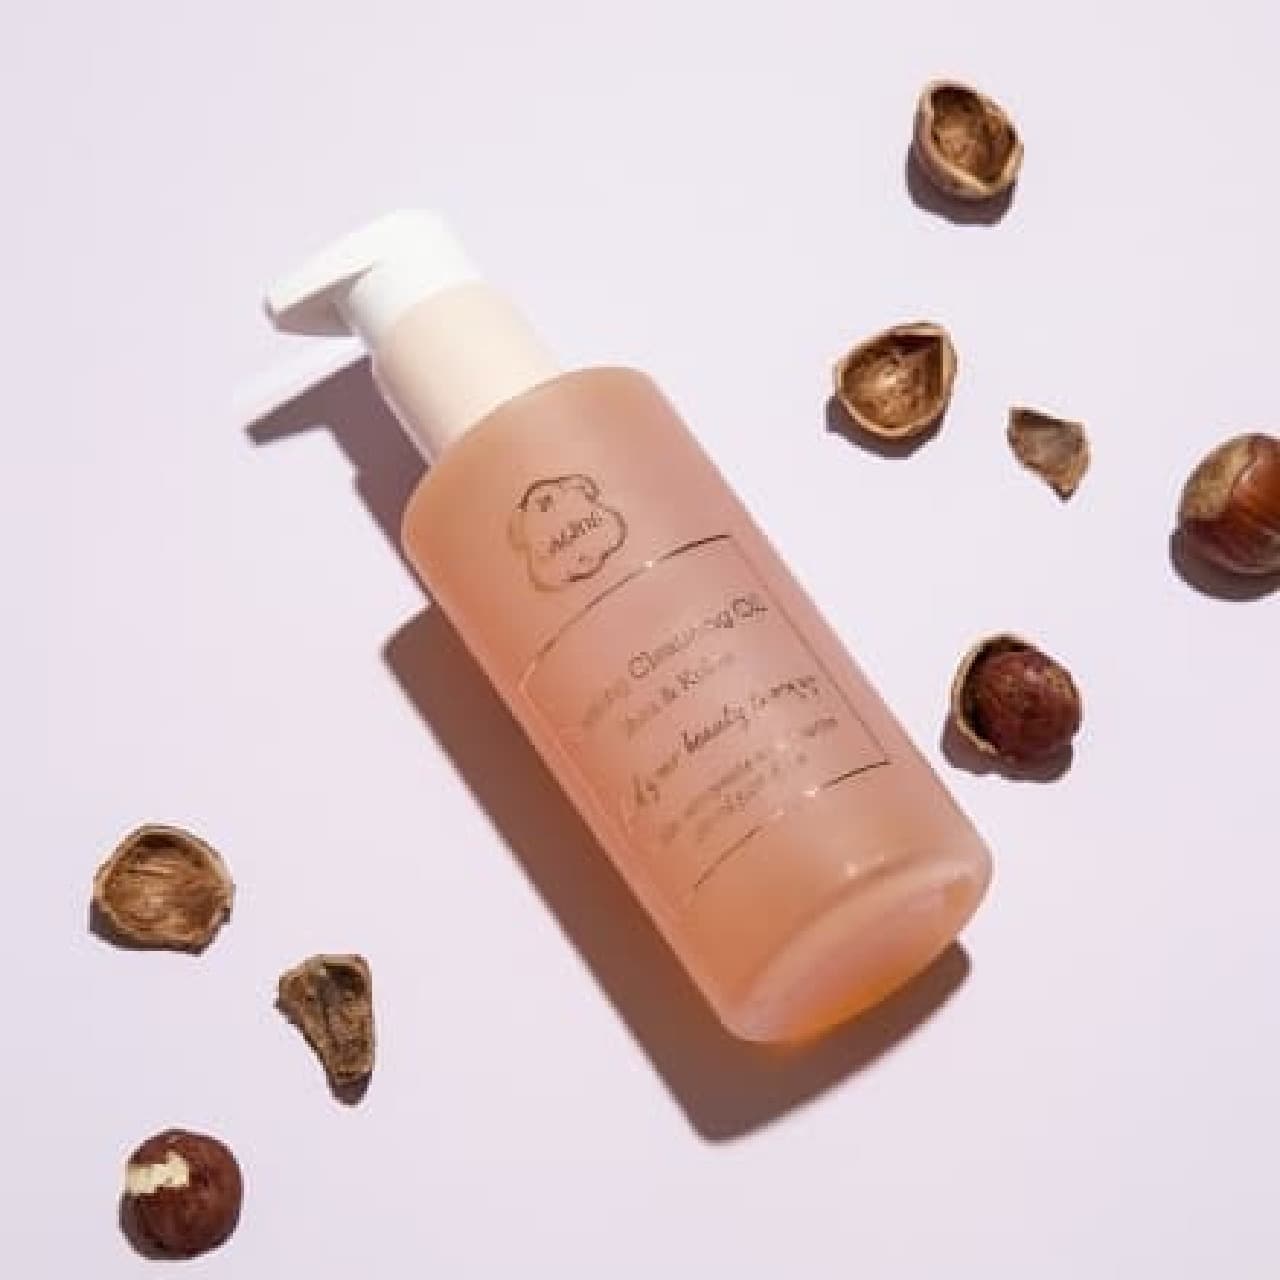 Laline "Shea & Kukui Forming Cleansing Oil"